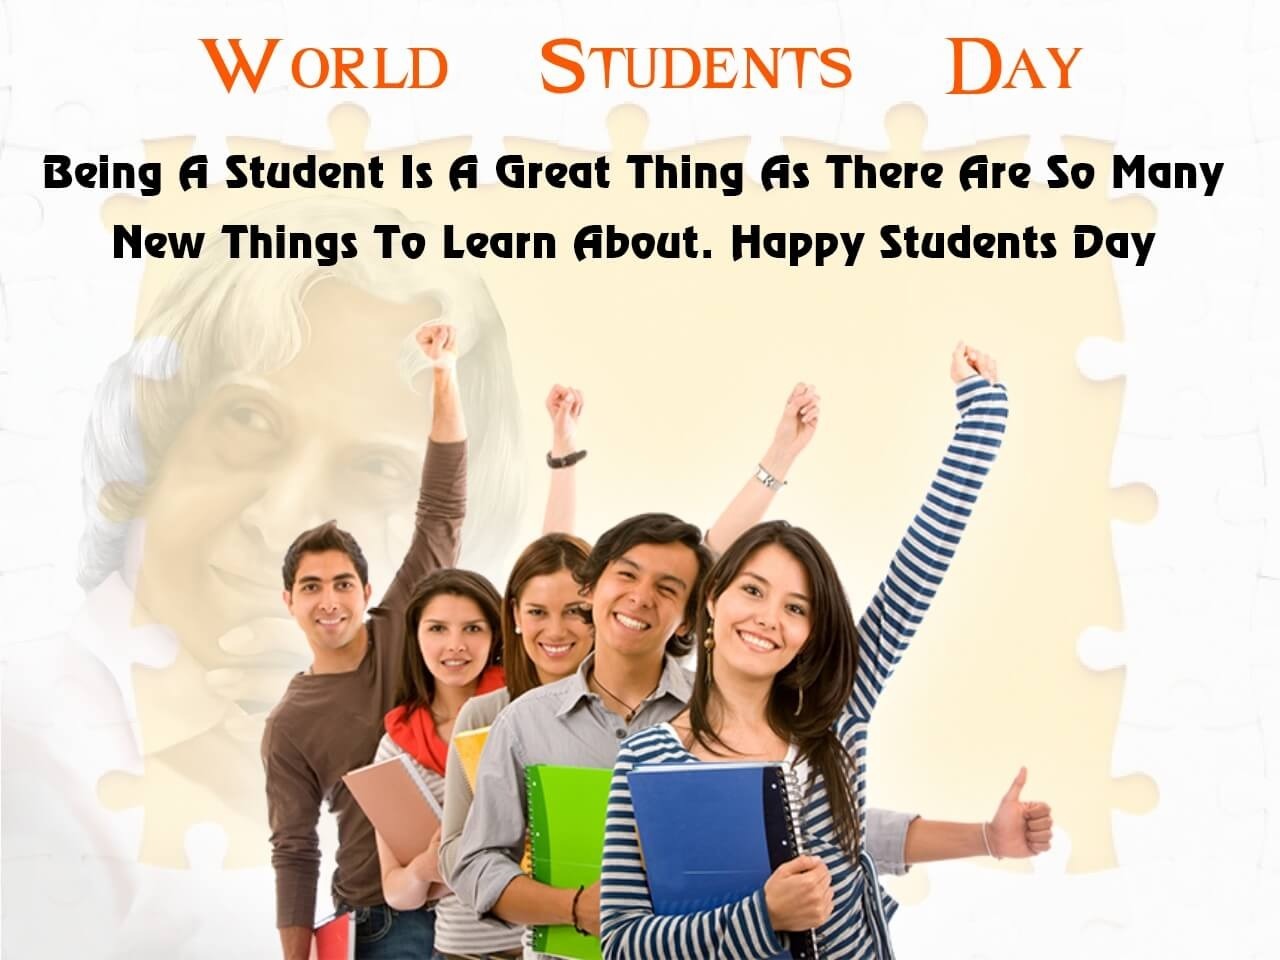 20+ World Students Day Images, Pictures, Photos